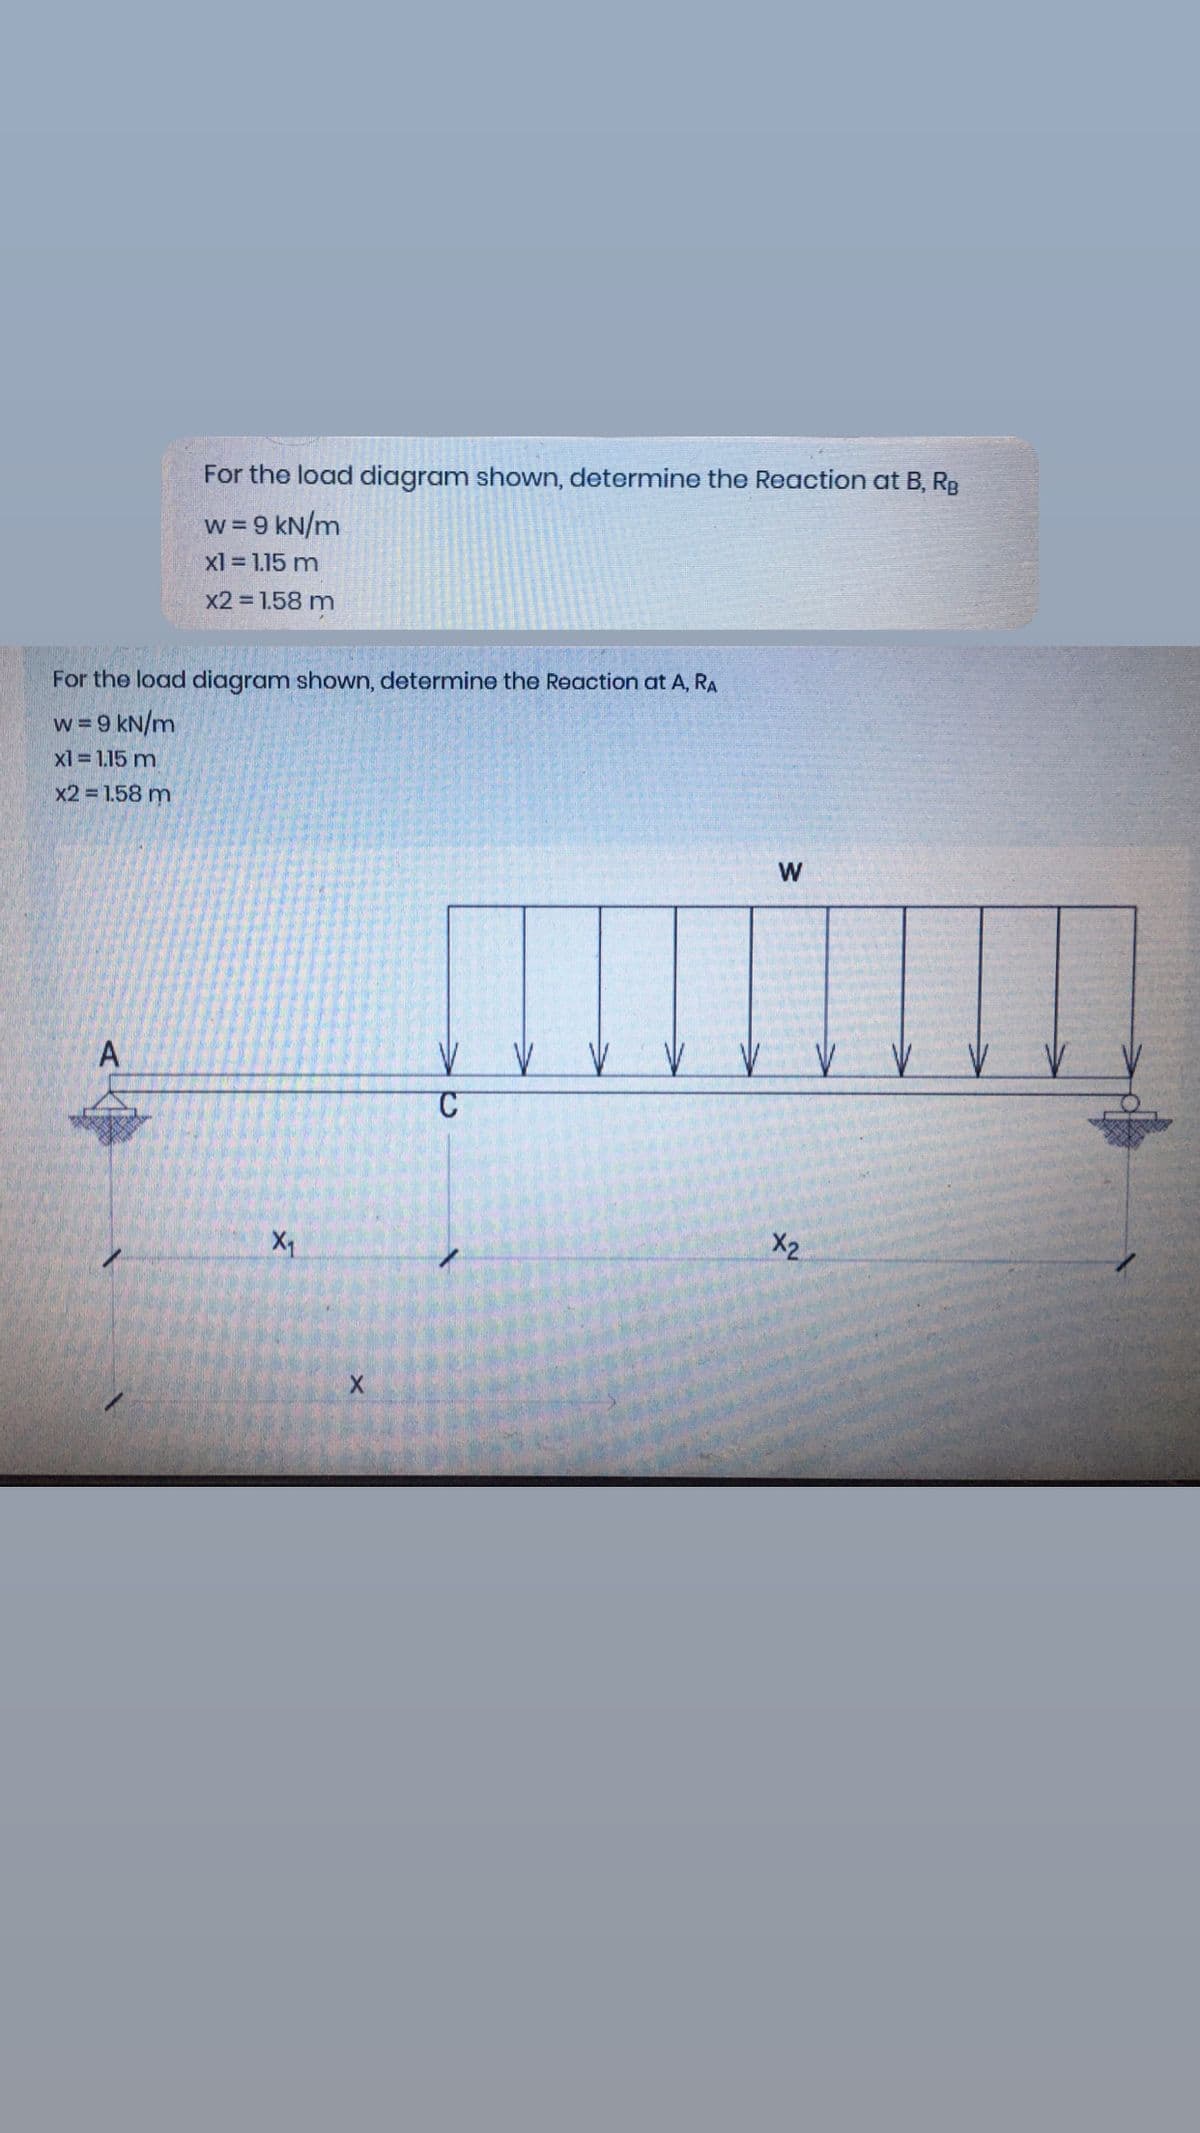 For the load diagram shown, determine the Reaction at B, Rg
w = 9 kN/m
xl = 1.15 m
x2 1.58 m
For the load diagram shown, determine the Reaction at A, RA
w = 9 kN/m
xl 1.15 m
x2 1.58 m
W
A
X1
X2
w/
